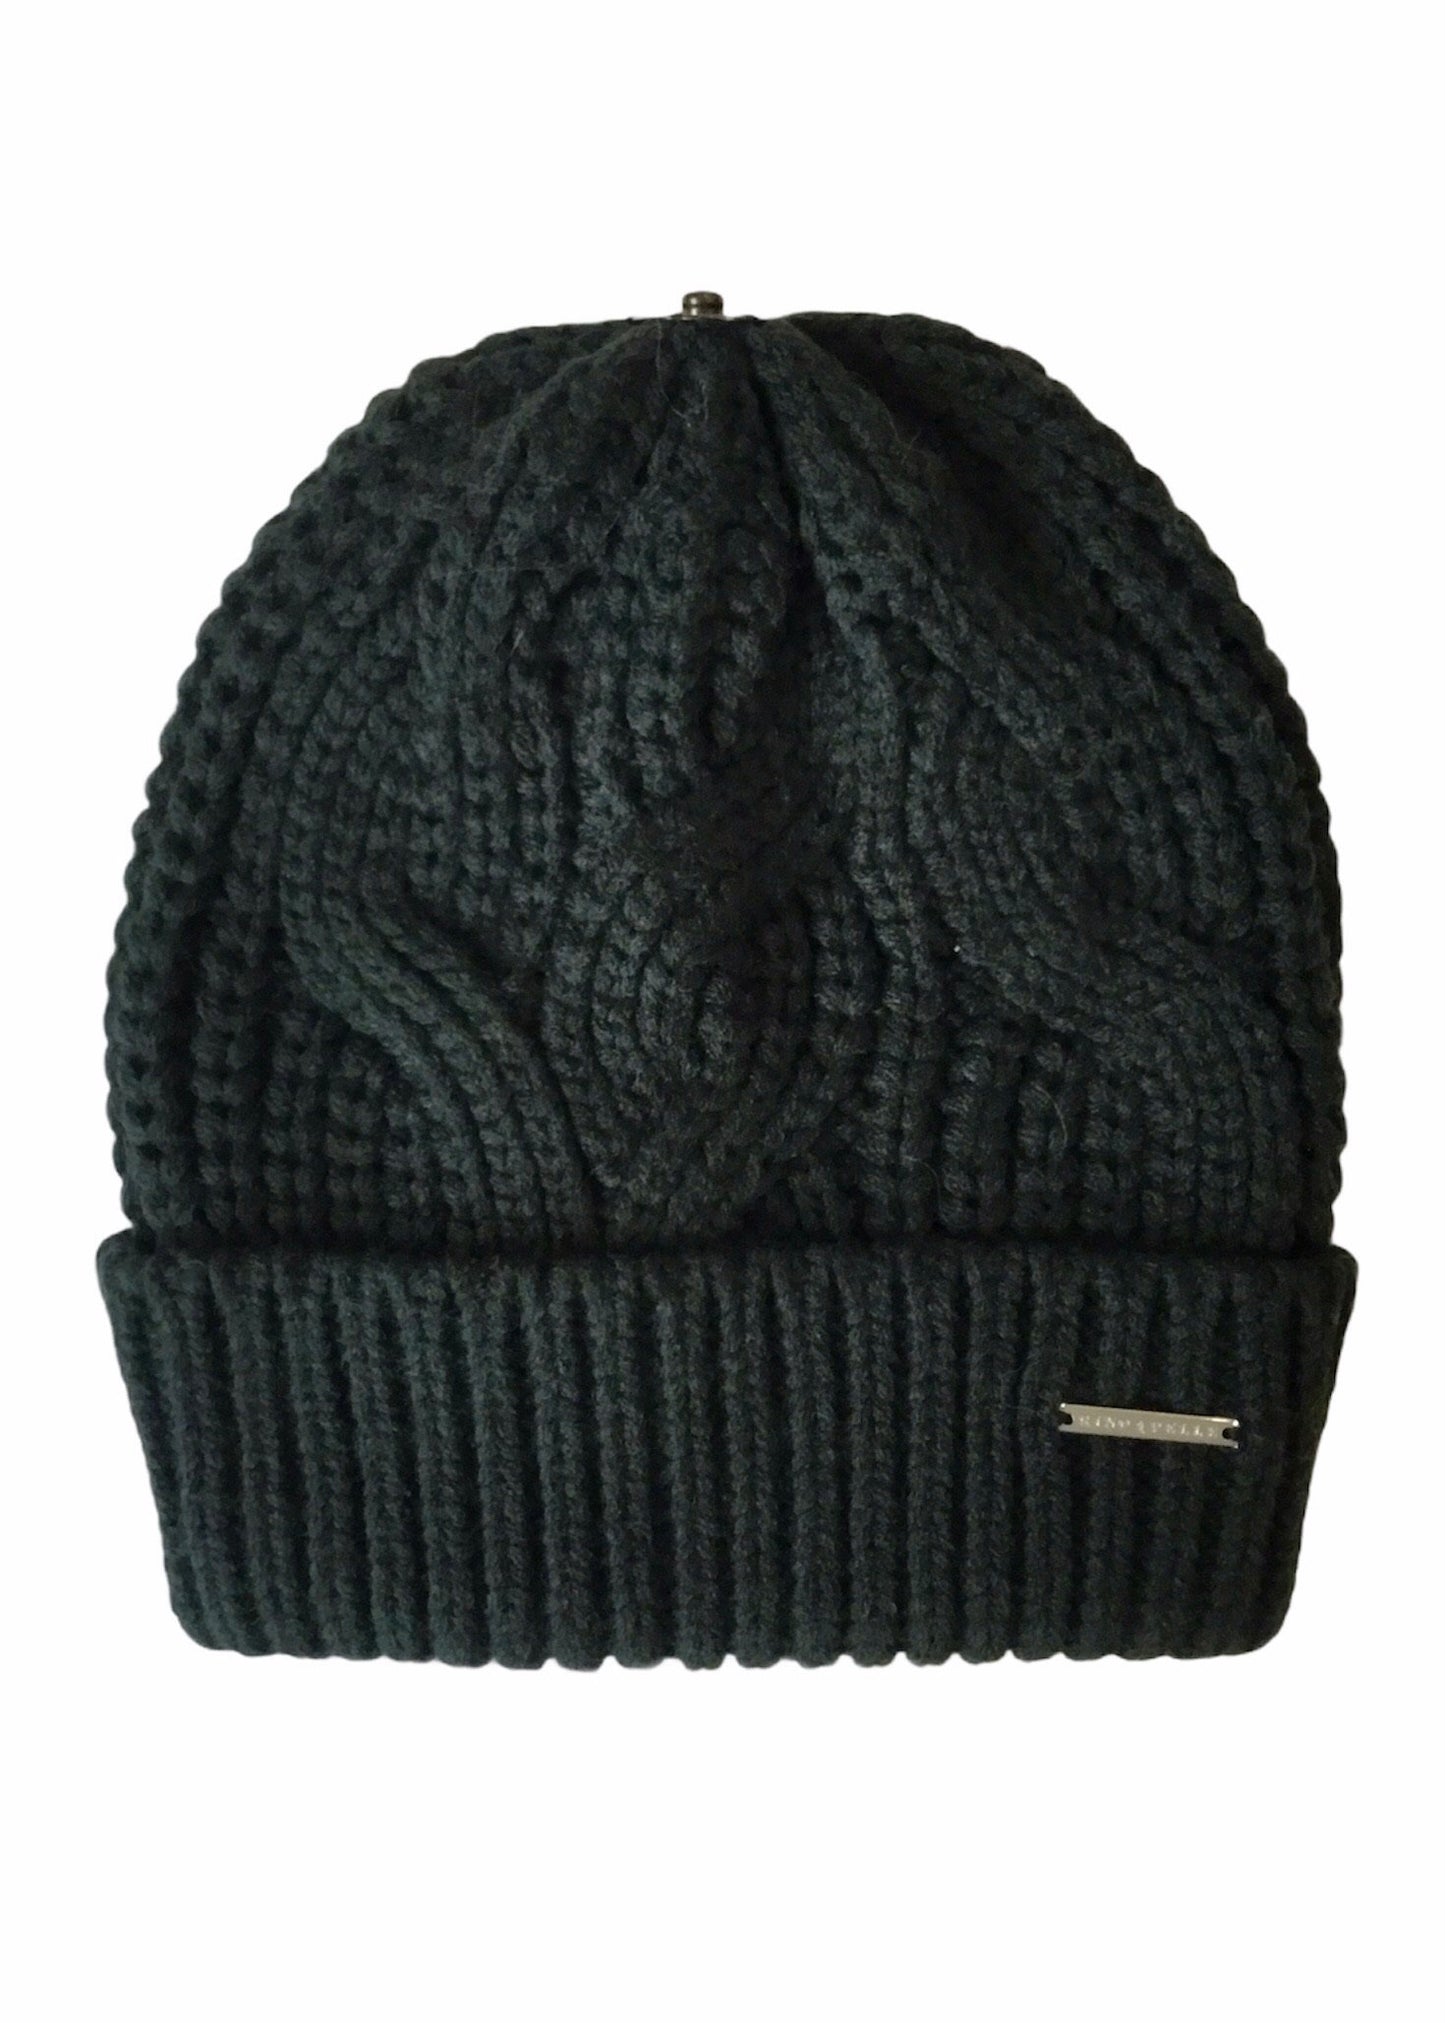 Rino & Pelle - Cable Knit Hat with changeable Pom-Pom’s